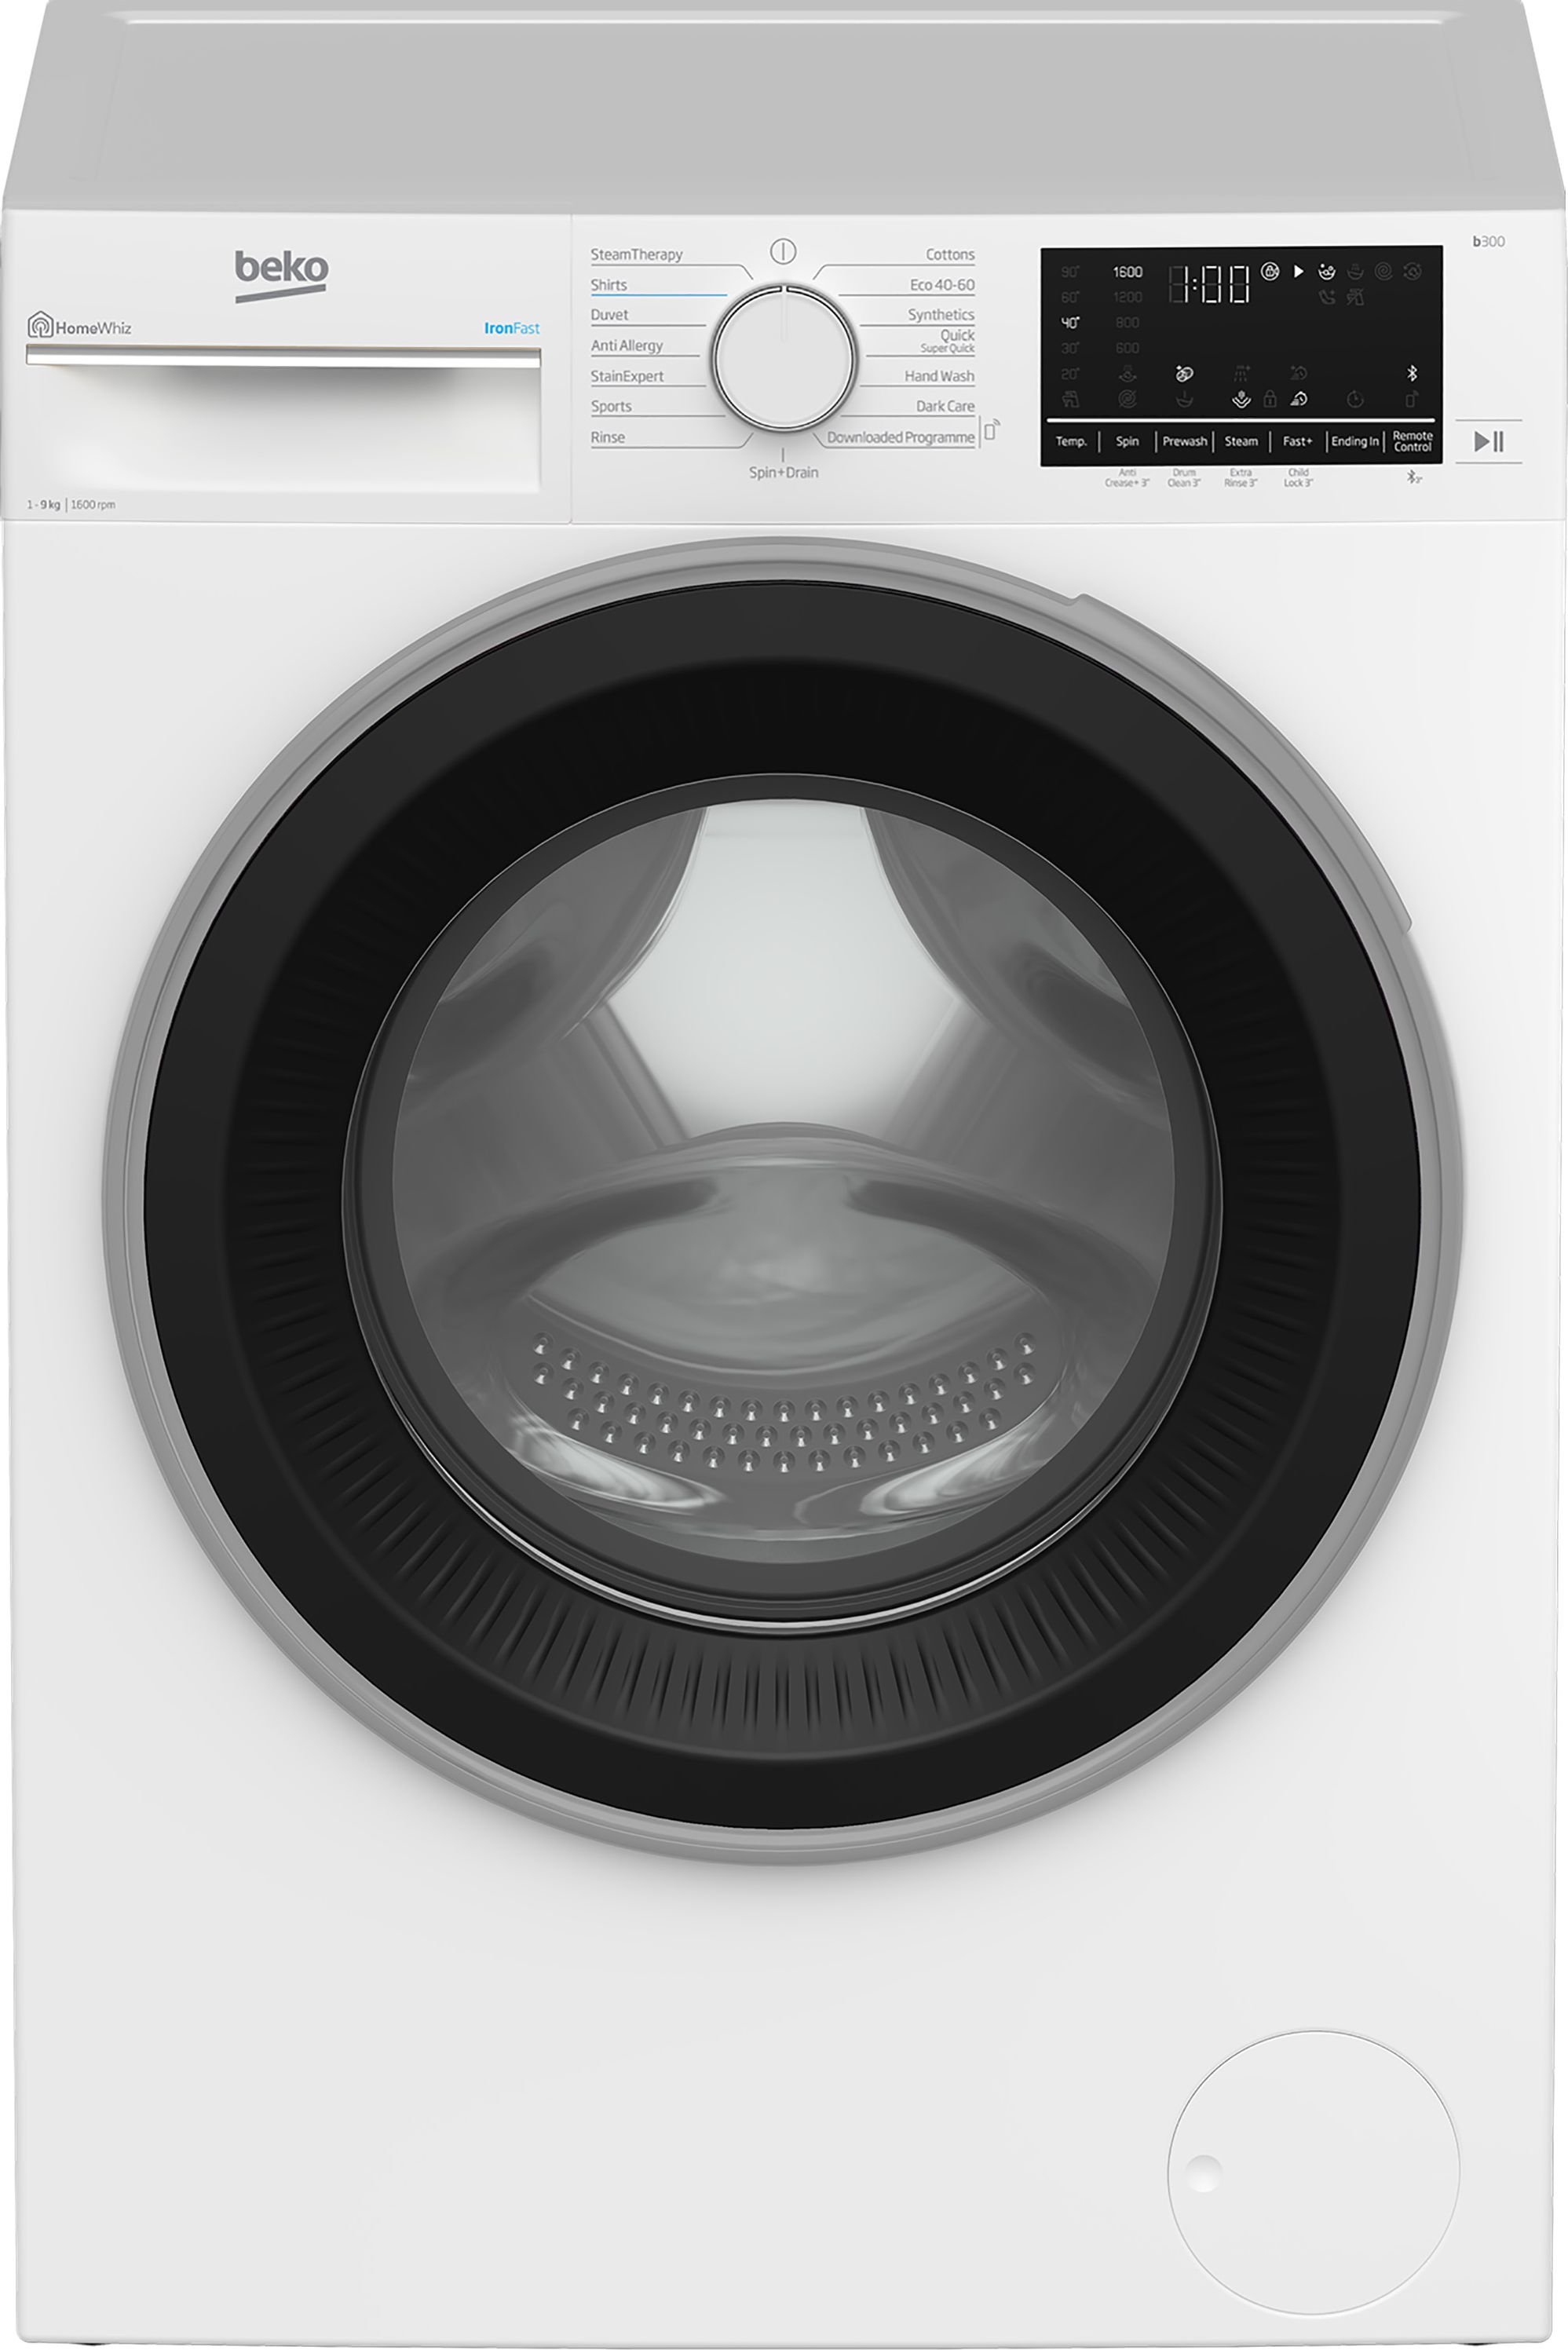 Beko IronFast RecycledTub B3W5961IW 9kg Washing Machine with 1600 rpm - White - A Rated, White